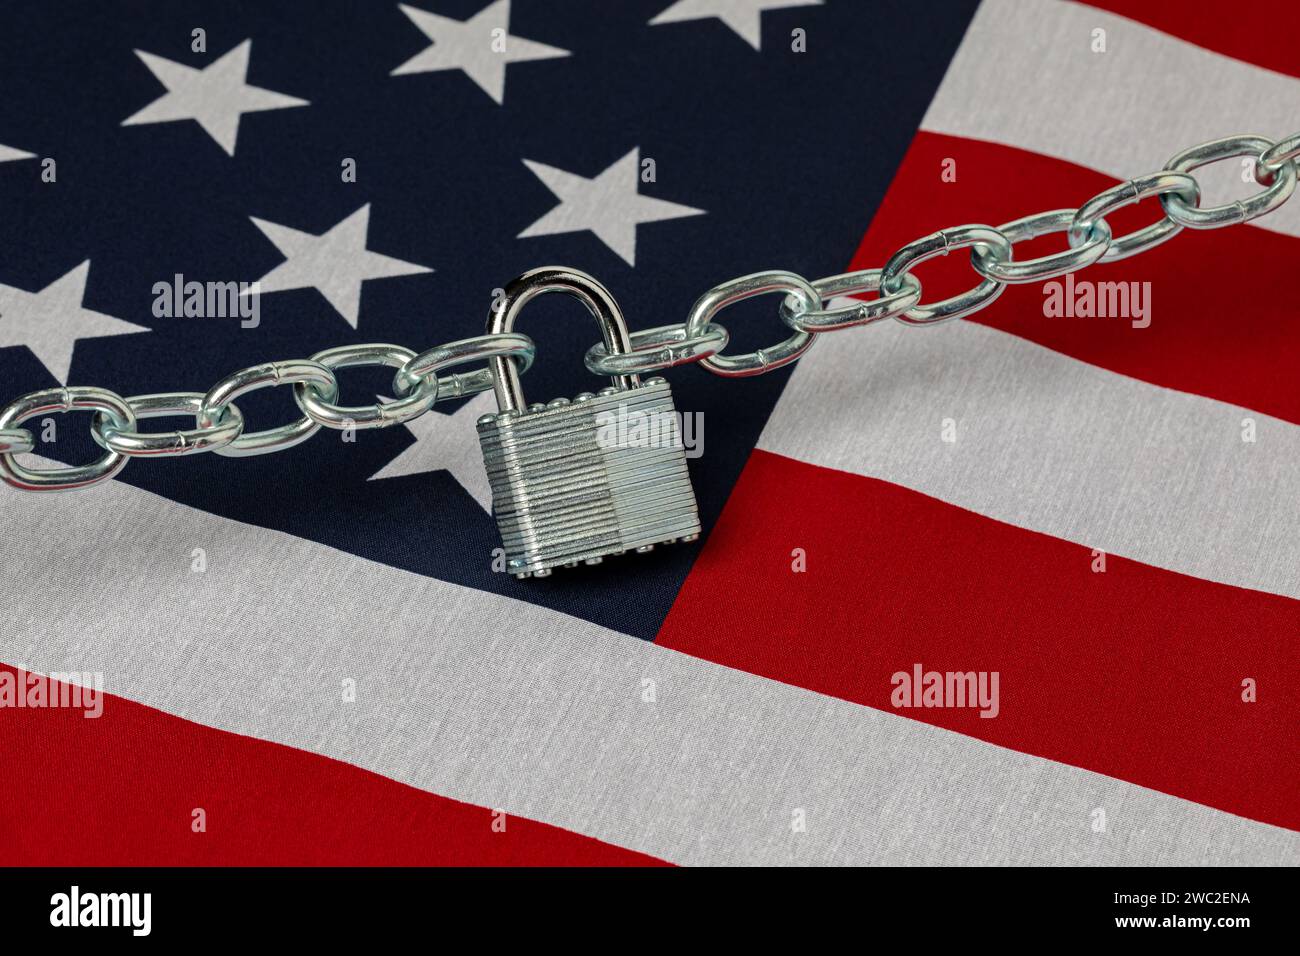 United States flag with unlocked chain. Border security, immigration reform and illegal migrant crisis concept. Stock Photo